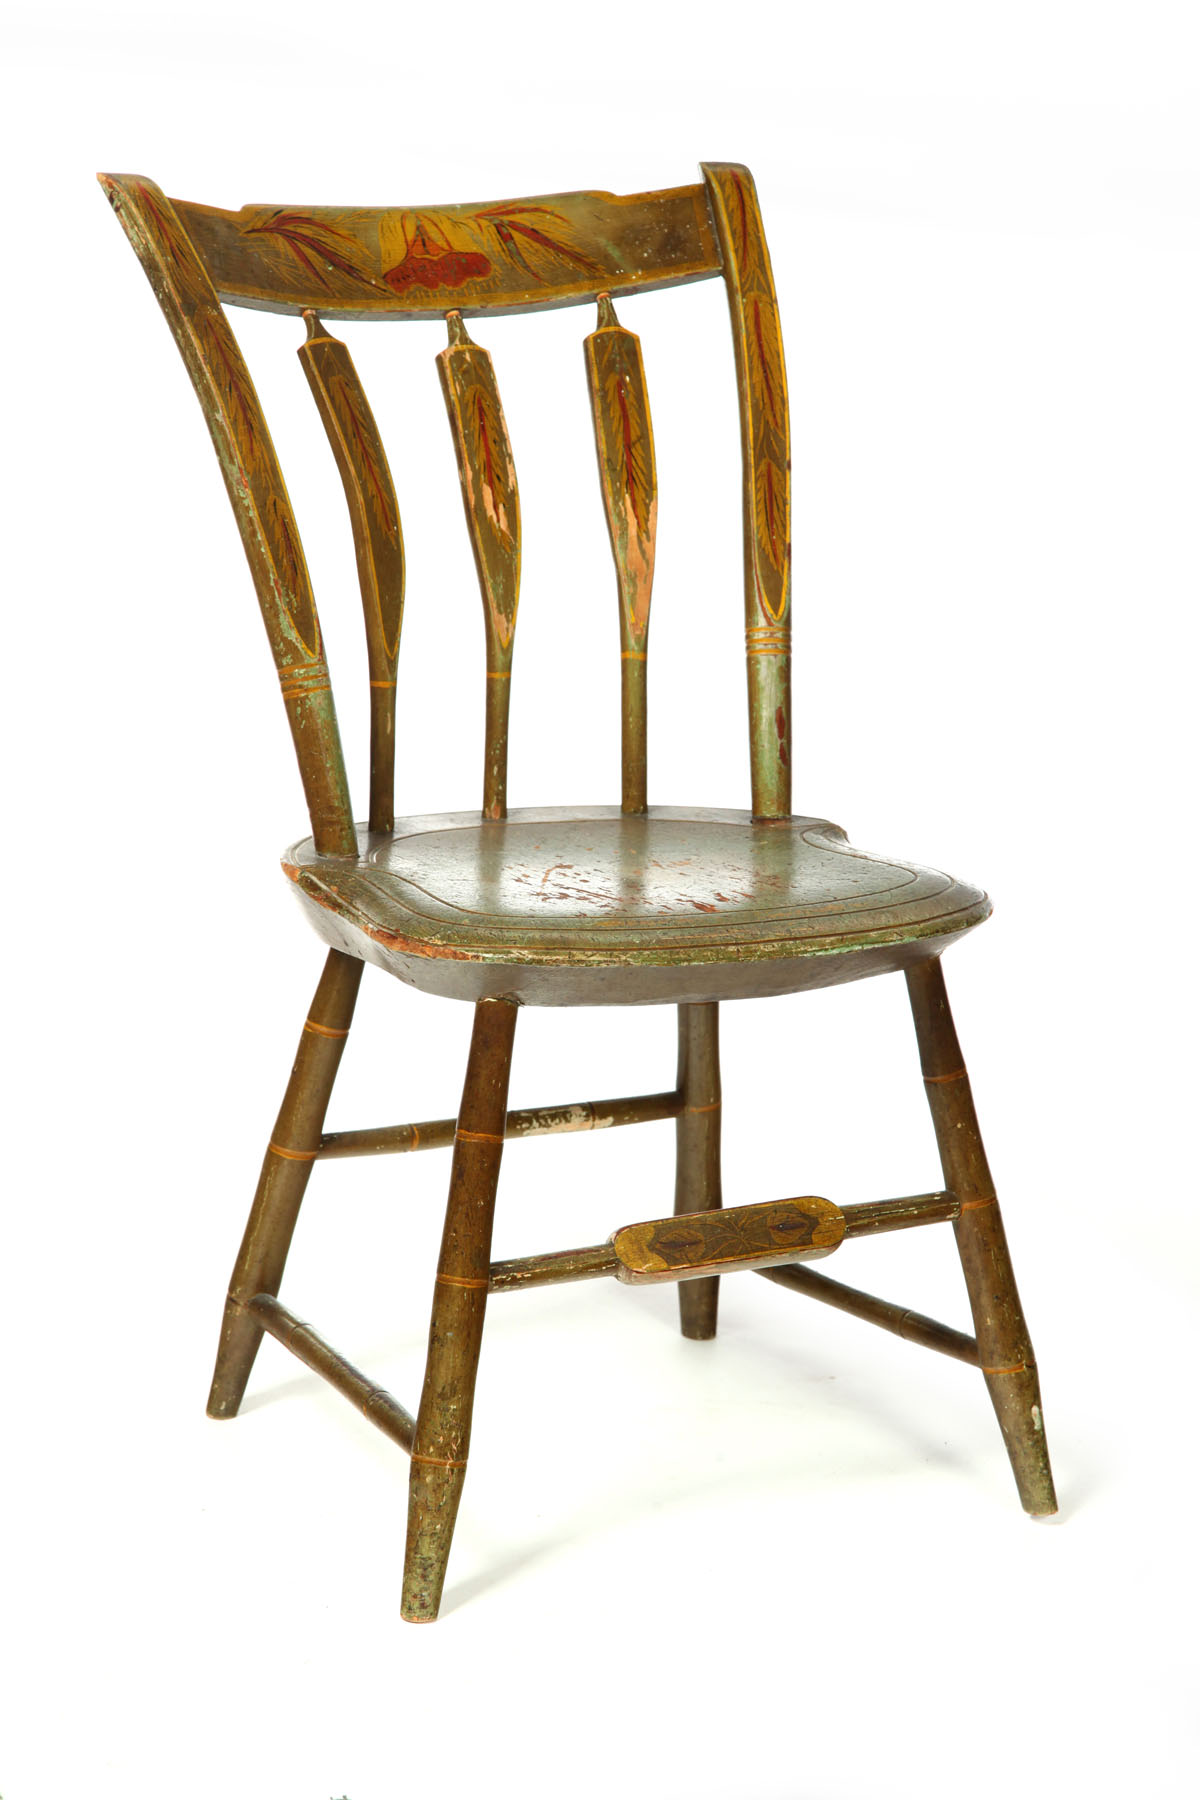 DECORATED CHILD S WINDSOR CHAIR  1239a5